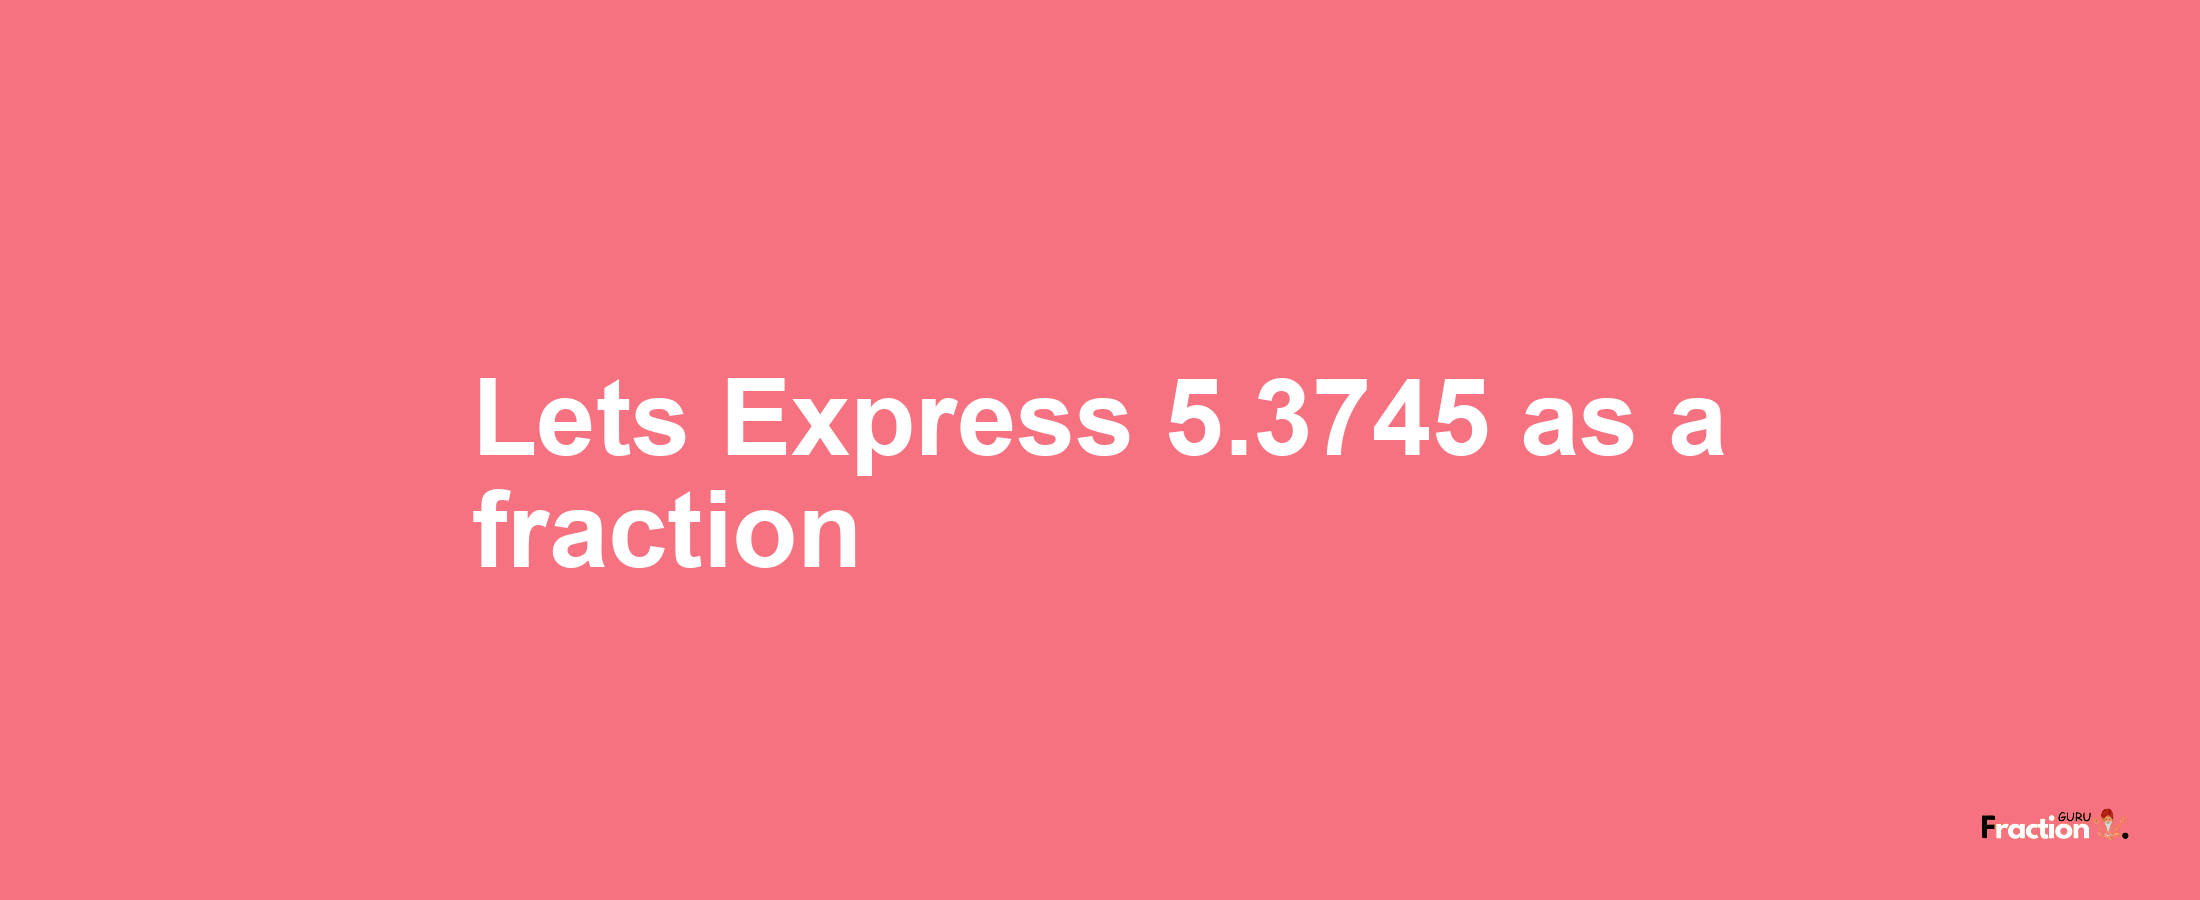 Lets Express 5.3745 as afraction